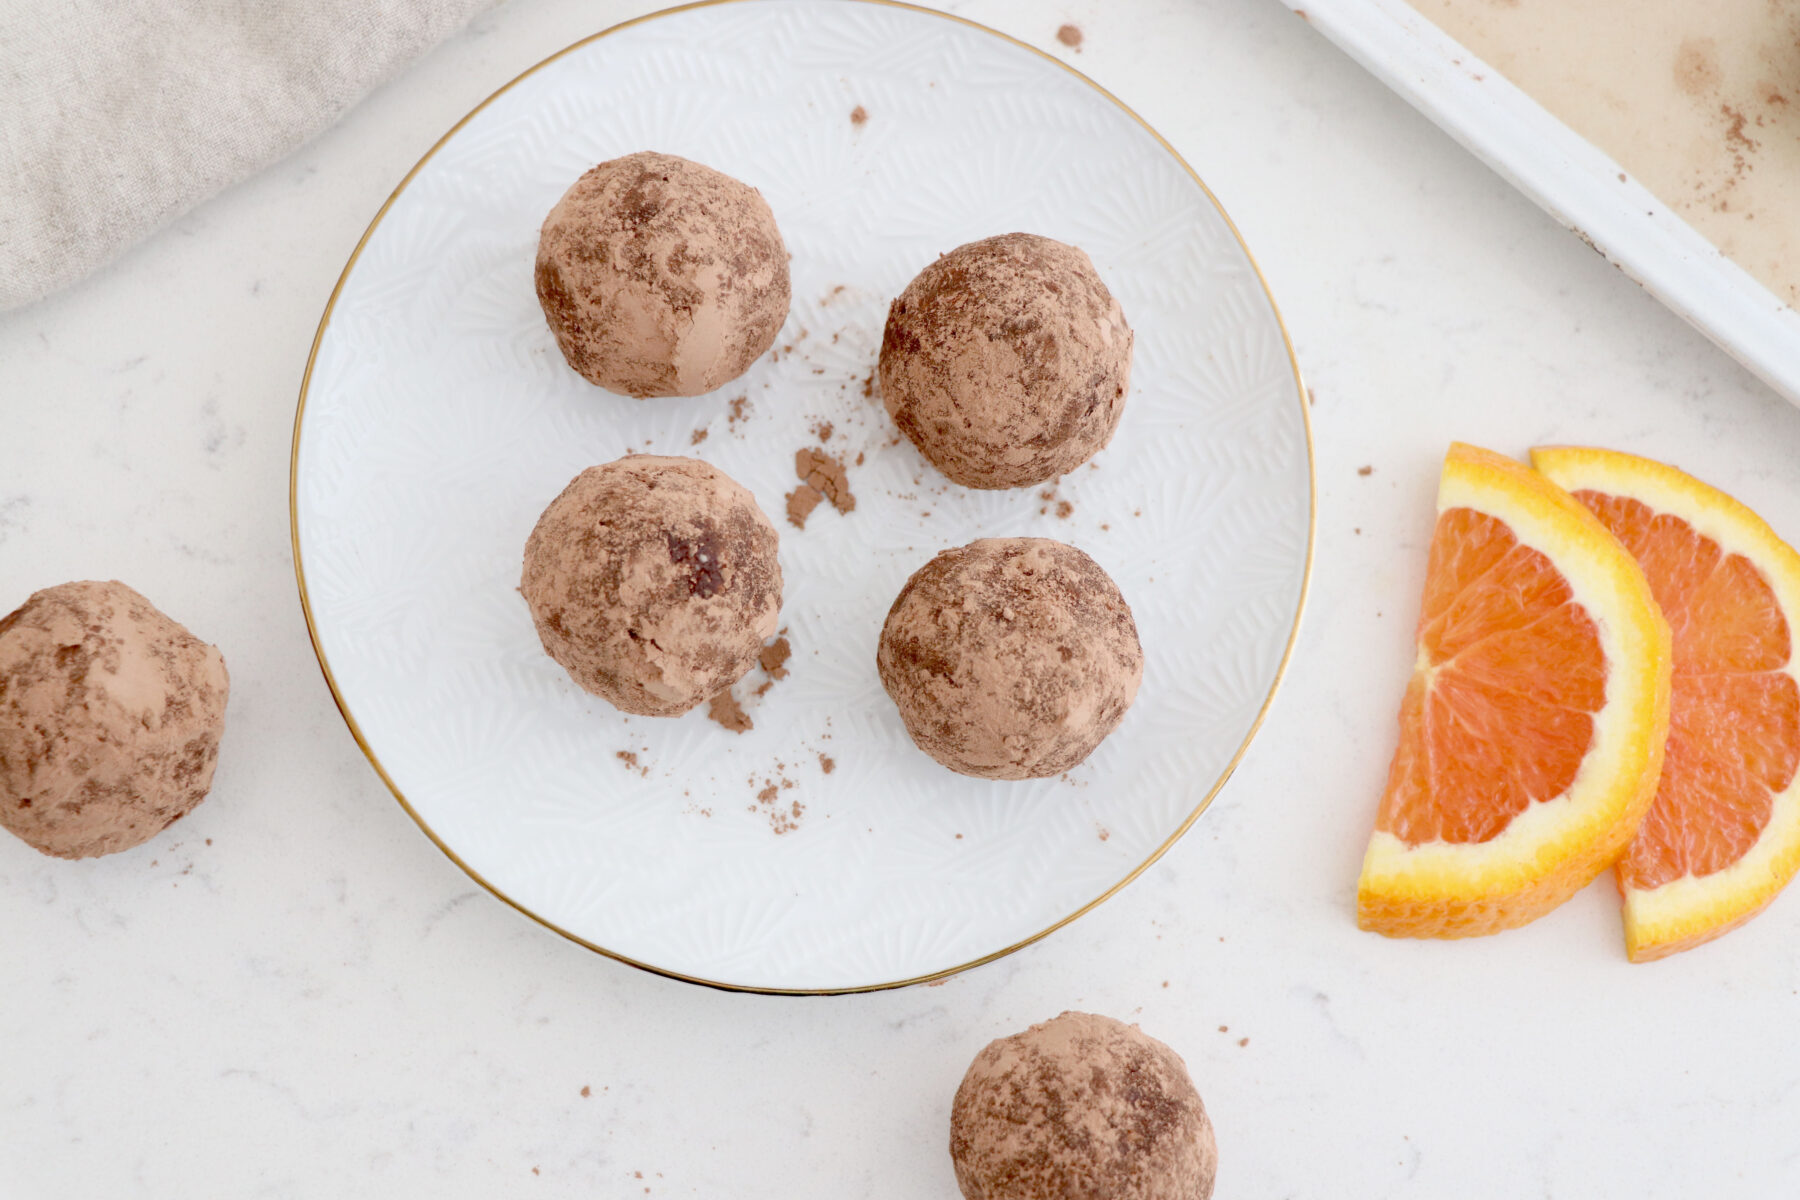 White plate of 4 chocolate truffles with 2 on each side and 2 orange slices on right side.